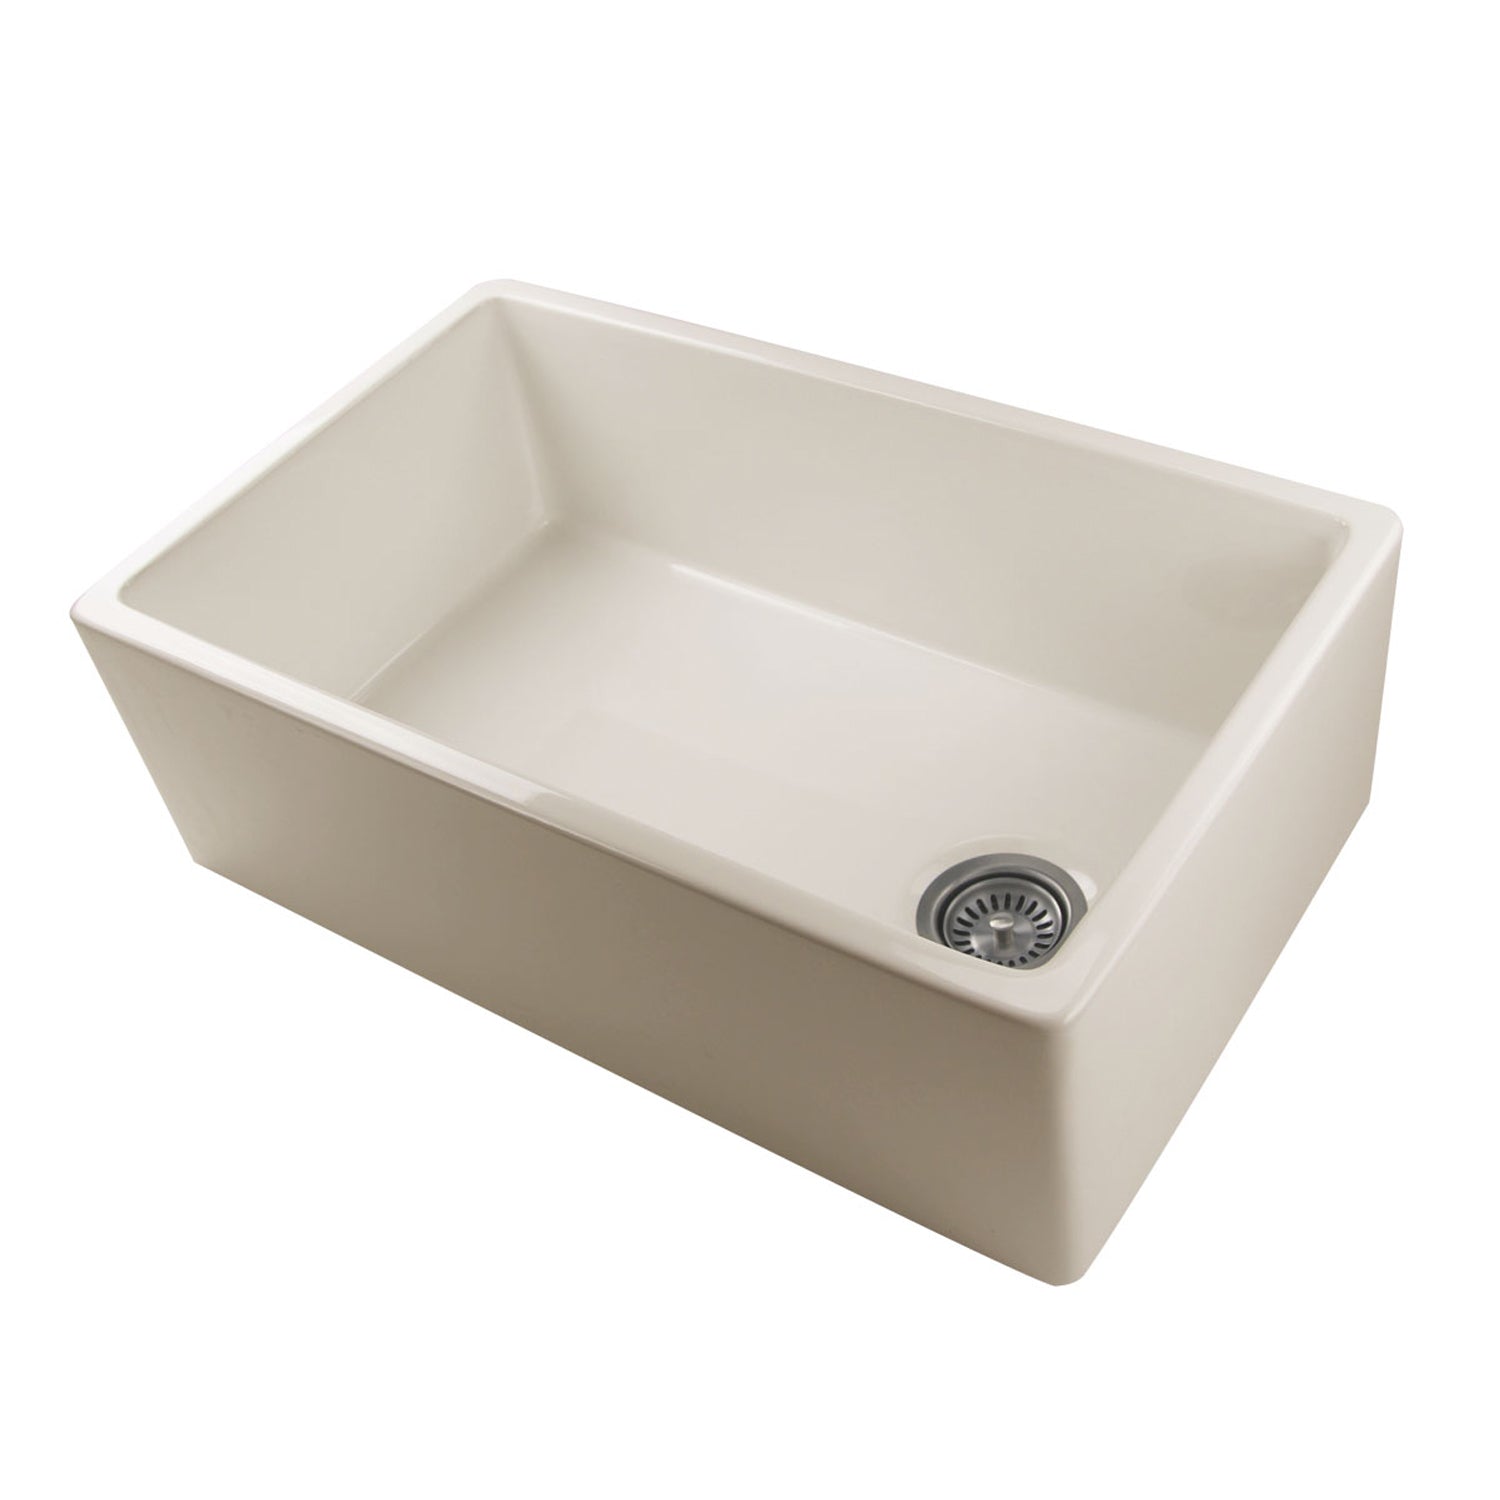 Nantucket Sinks 30" Fireclay Farmhouse Sink Offset Drain with Grid